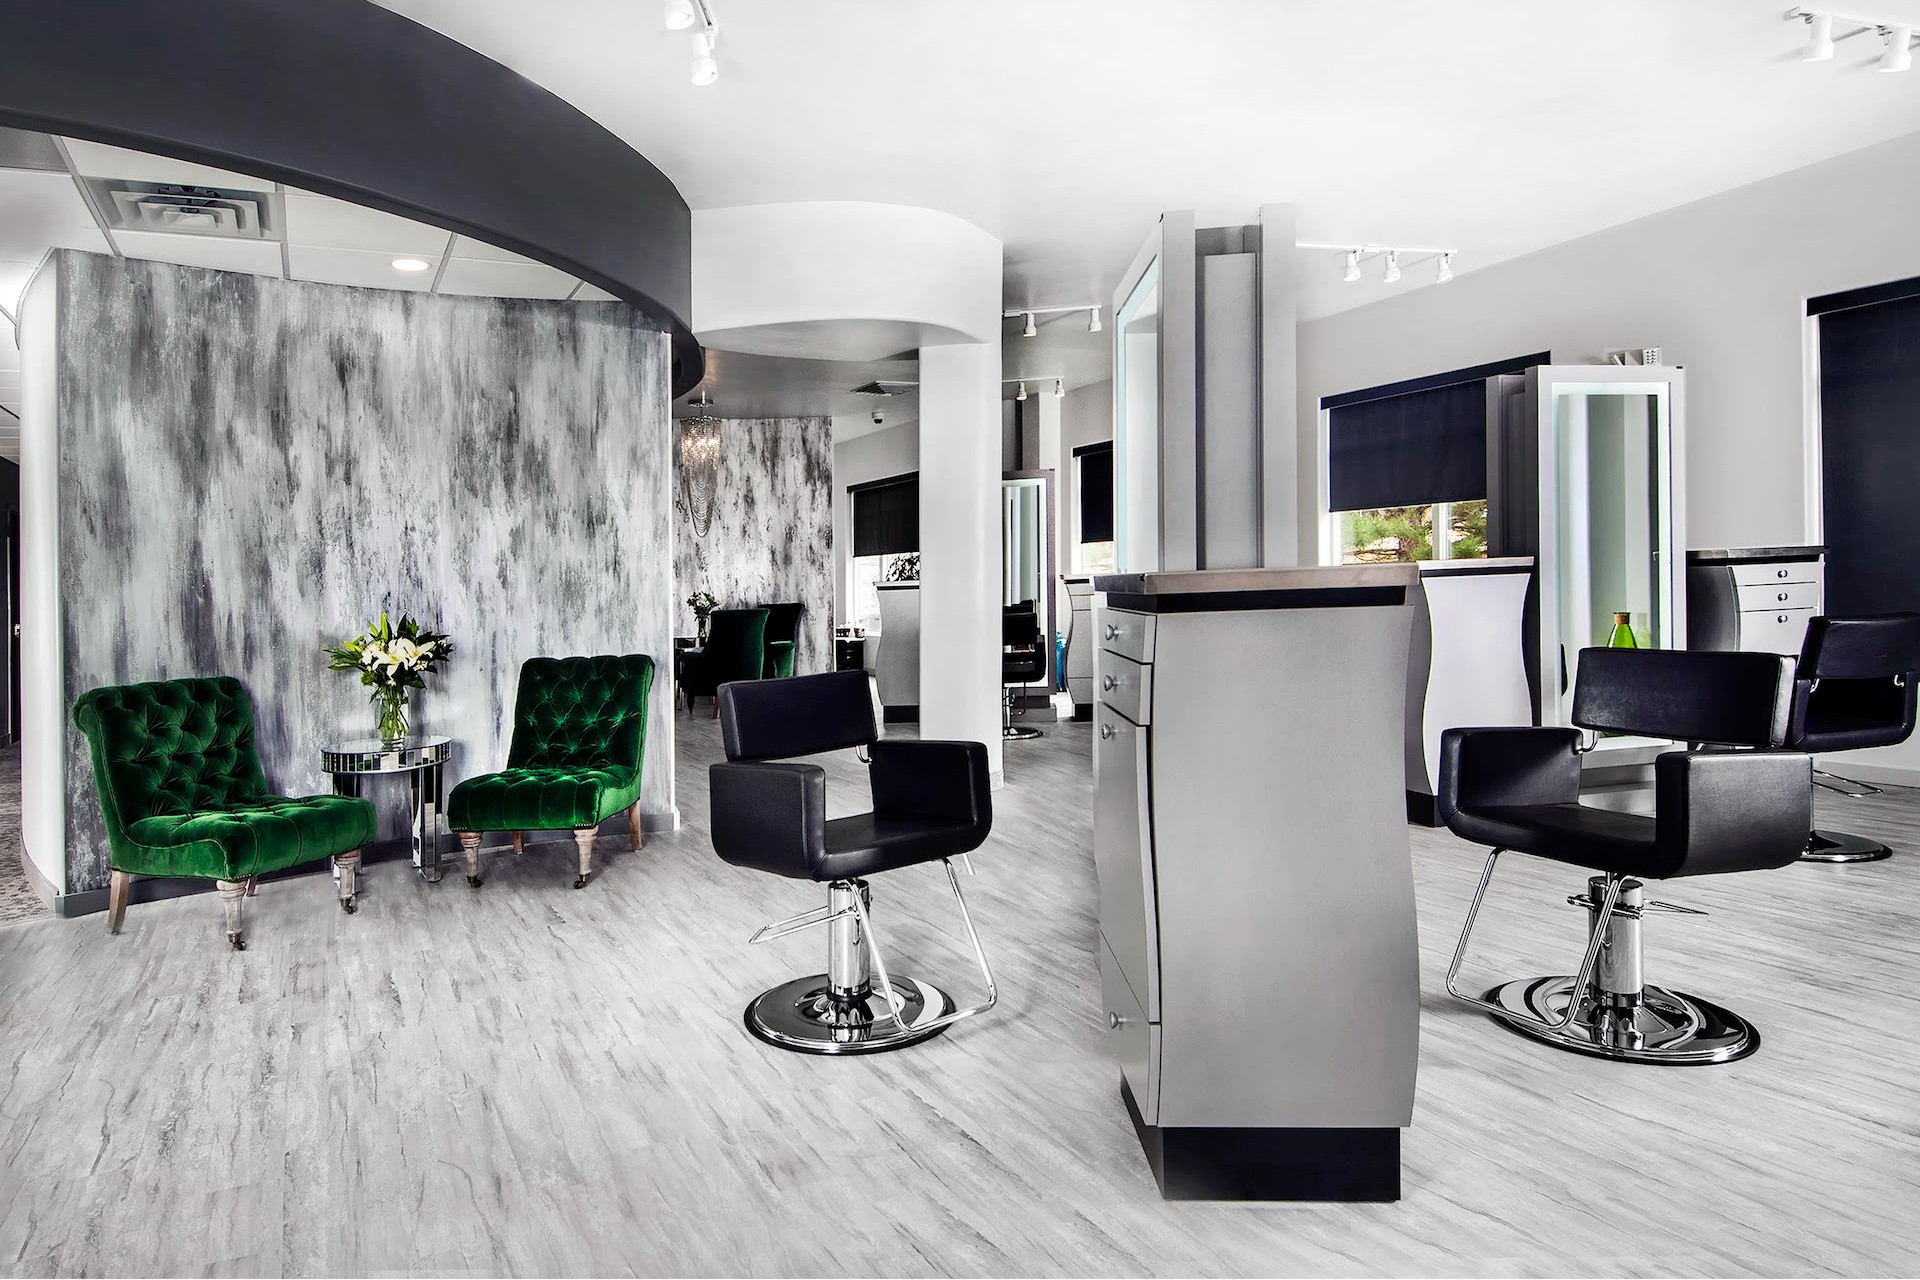 Eleven Salon waiting area and open concept style area